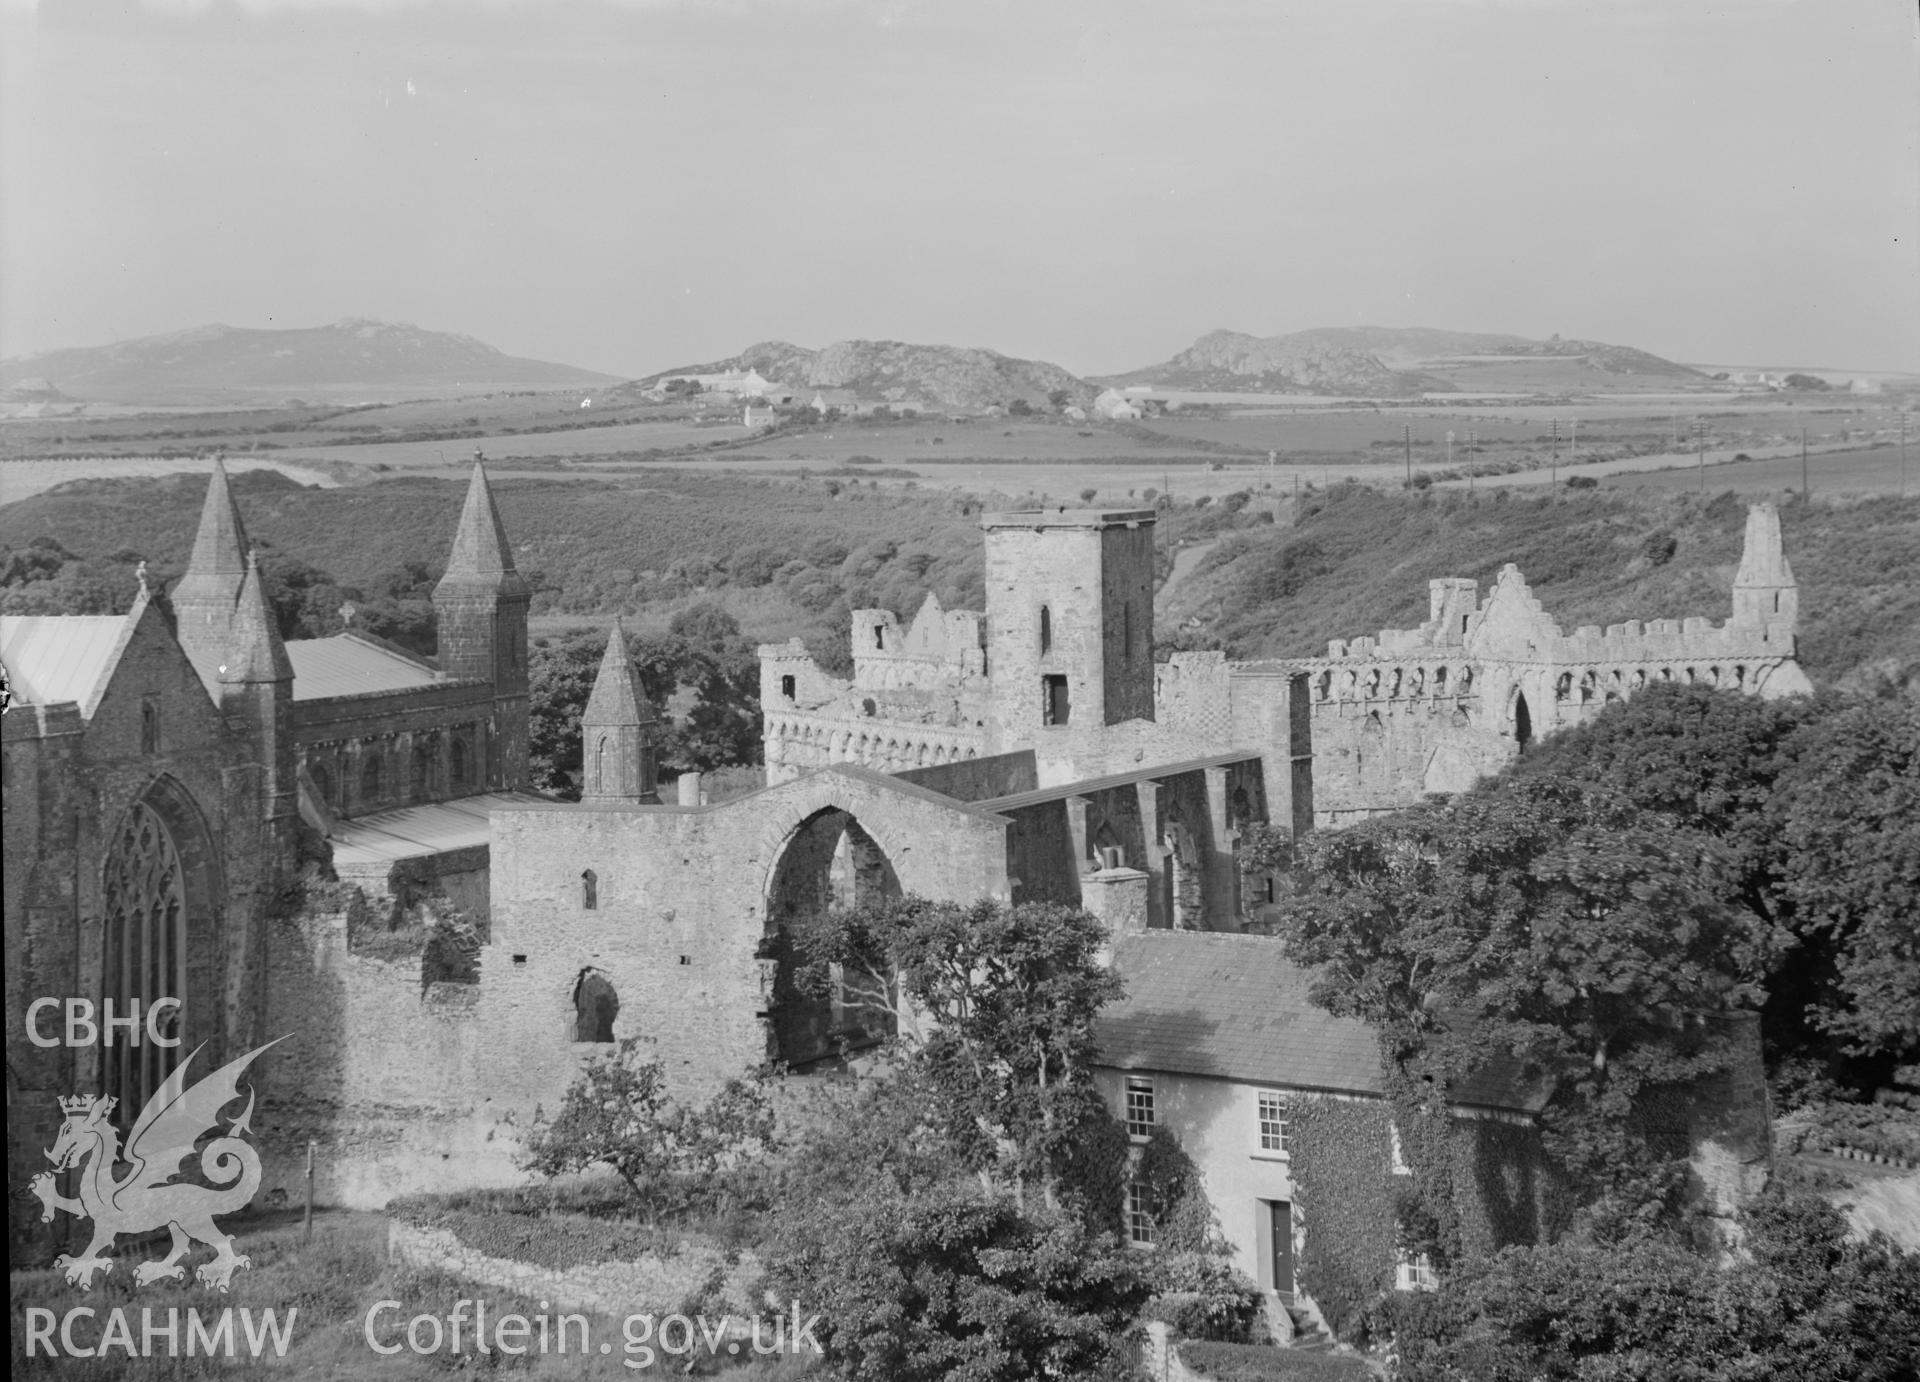 Digital copy of a black and white nitrate negative showing landscape view of Bishop's Palace, taken by E.W. Lovegrove, July 1936.